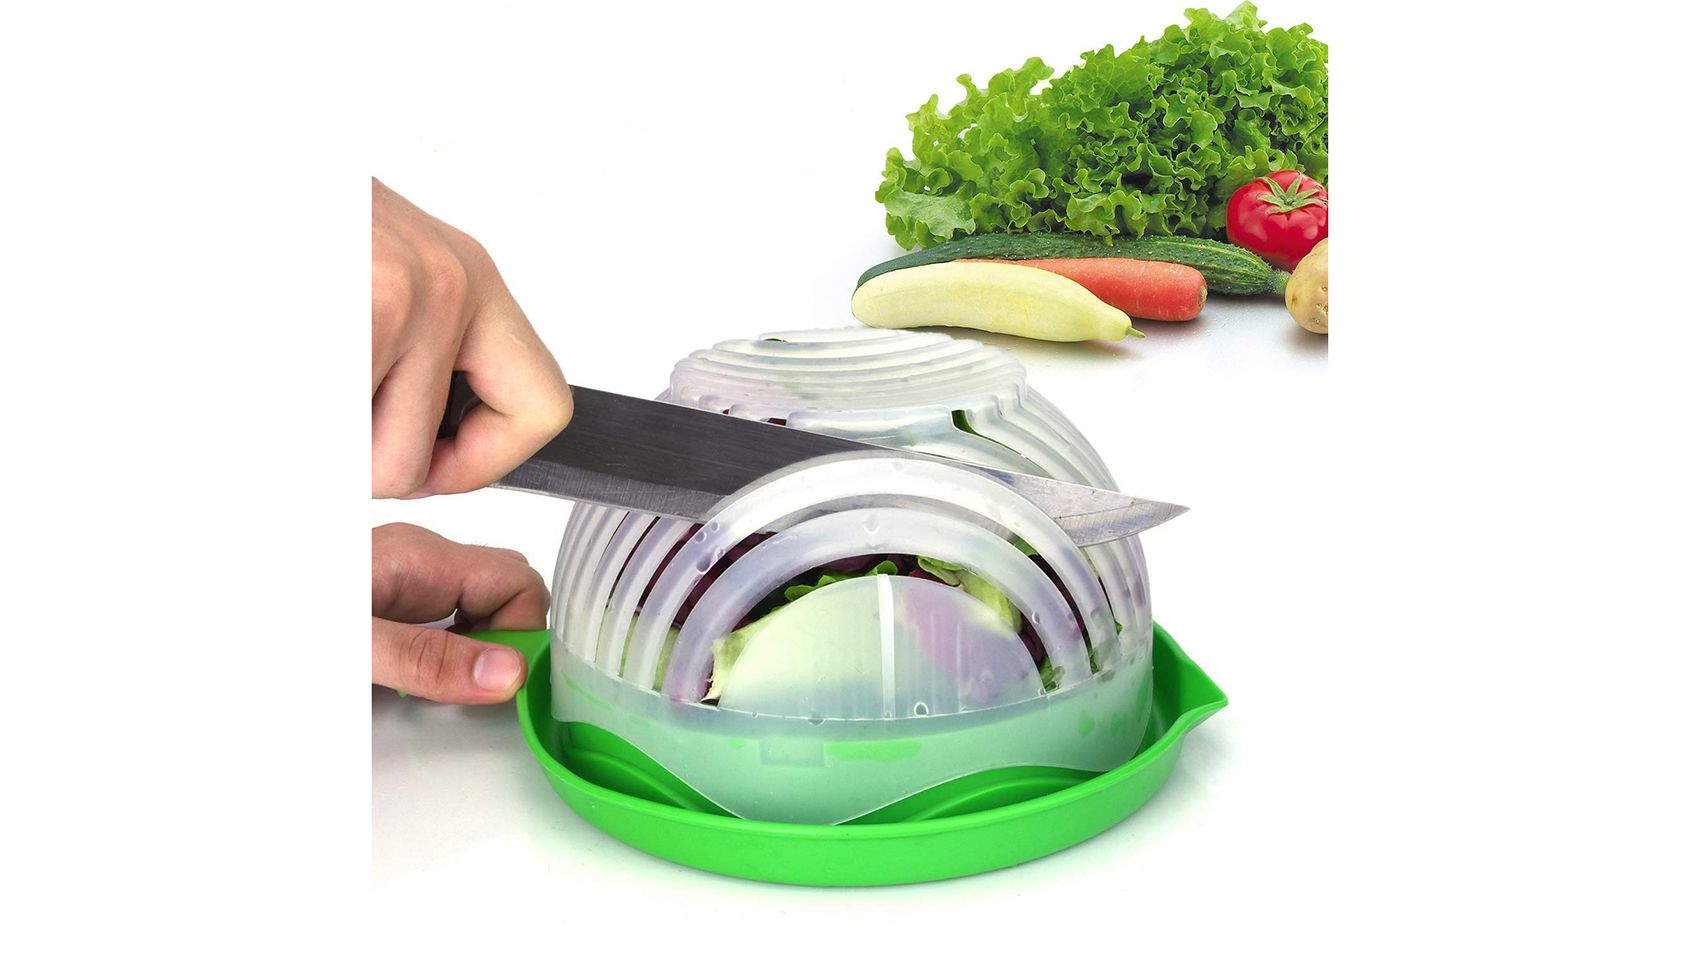 15 Must-Have Kitchen Gadgets to Make Eating Healthy Easier